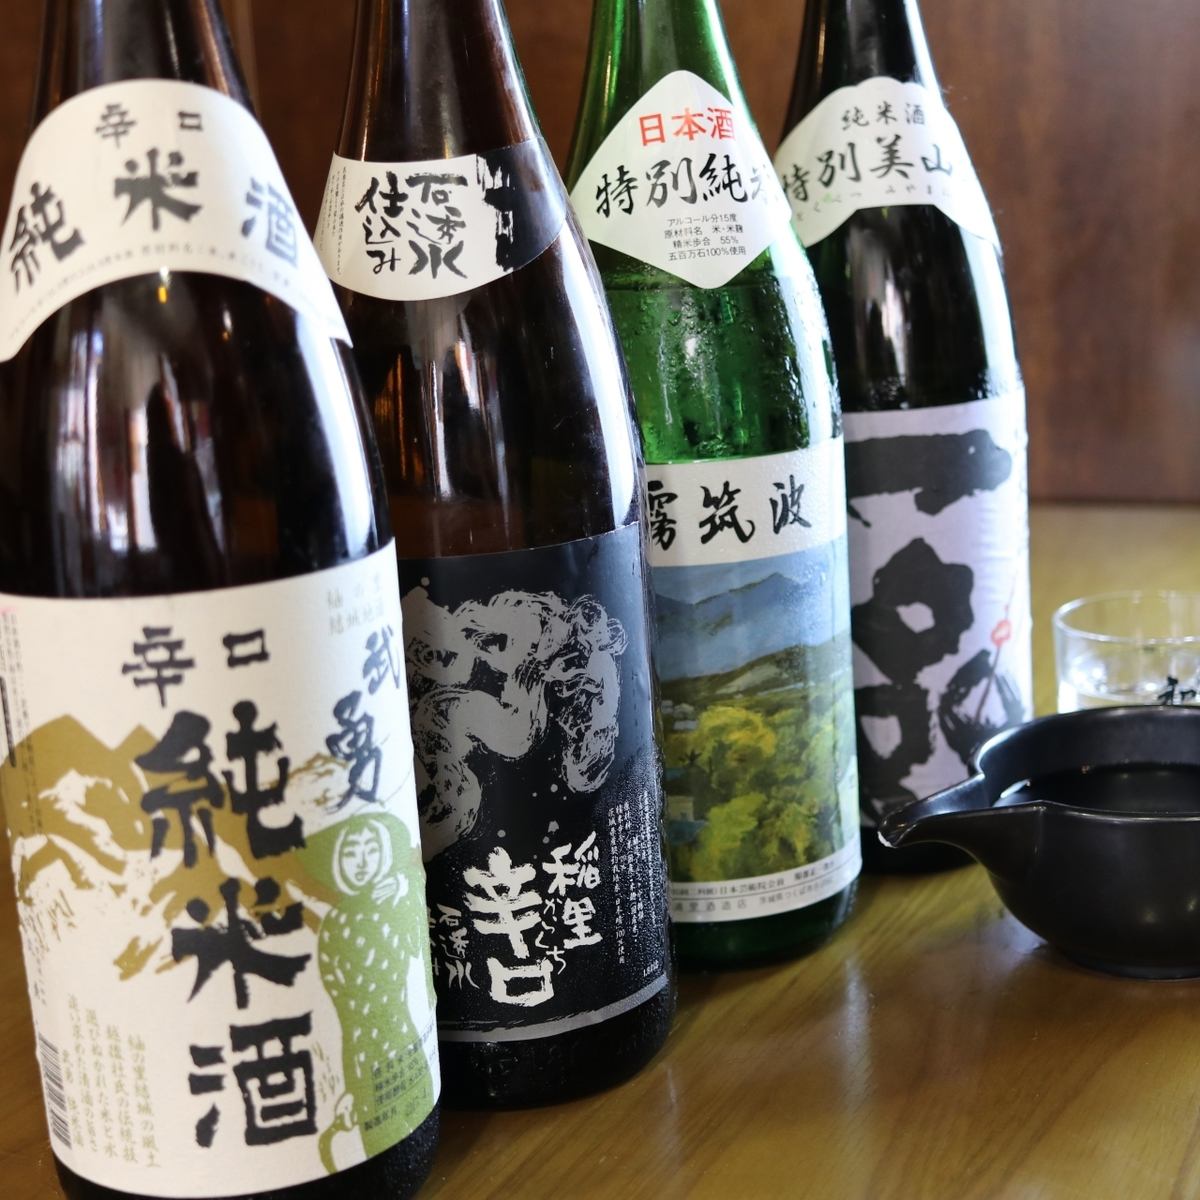 There is local sake from Ibaraki !! A wide variety of sake shochu ♪ Excellent compatibility with horse meat ♪